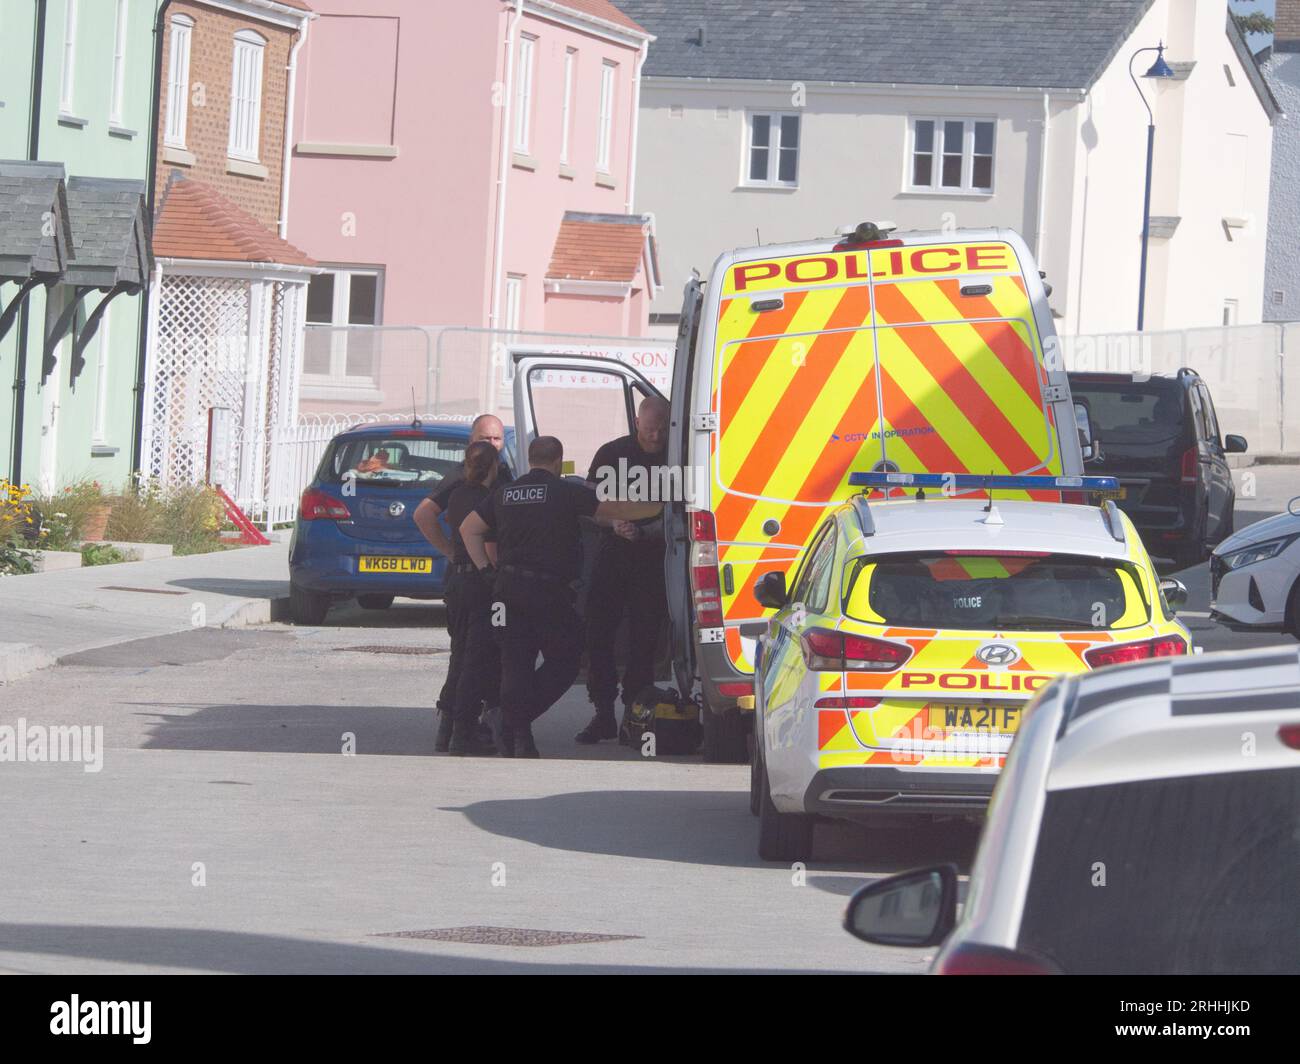 Several Police officers accompanied by sniffer dog are seen making a forced an entry to a house located on  Stret Kosti Veur Woles. This location is in the King Charles project model village on the outskirts of Newquay. An eye witness reported the front door was broken down to gain access. A number of individuals were seen being escorted by police officers. Devon and Cornwall Police make a drug related raid. Nansledan  Cornwall  UK. 17th August 2023. Robert Taylor Stock Photo